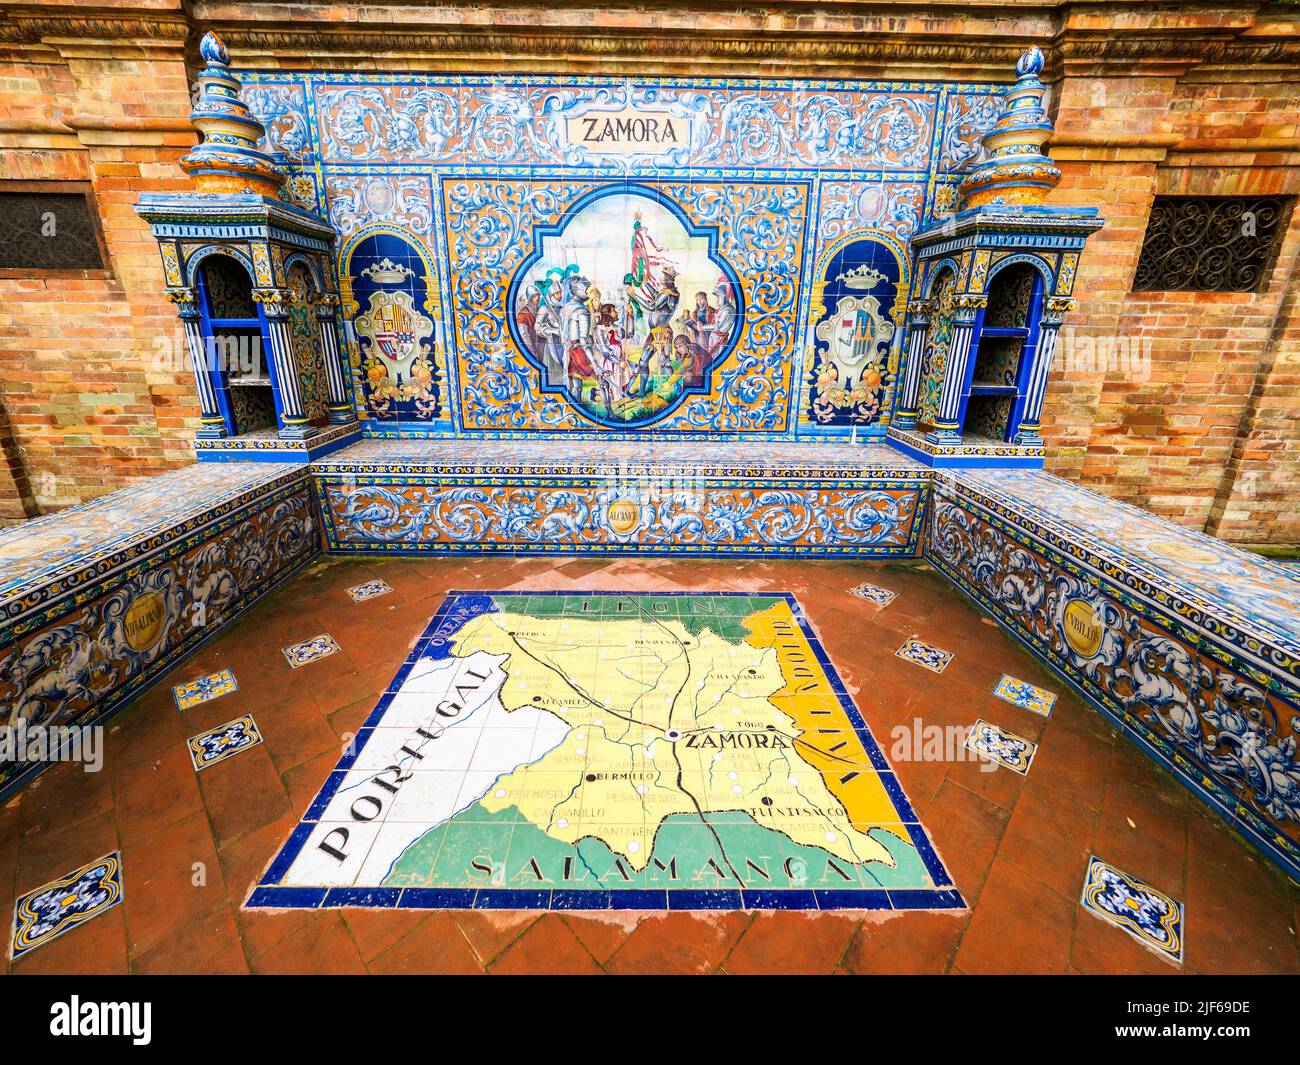 Detail of the tiled spanish province of Zamora alcove along the walls of Plaza de Espana building - Seville,  Spain Stock Photo